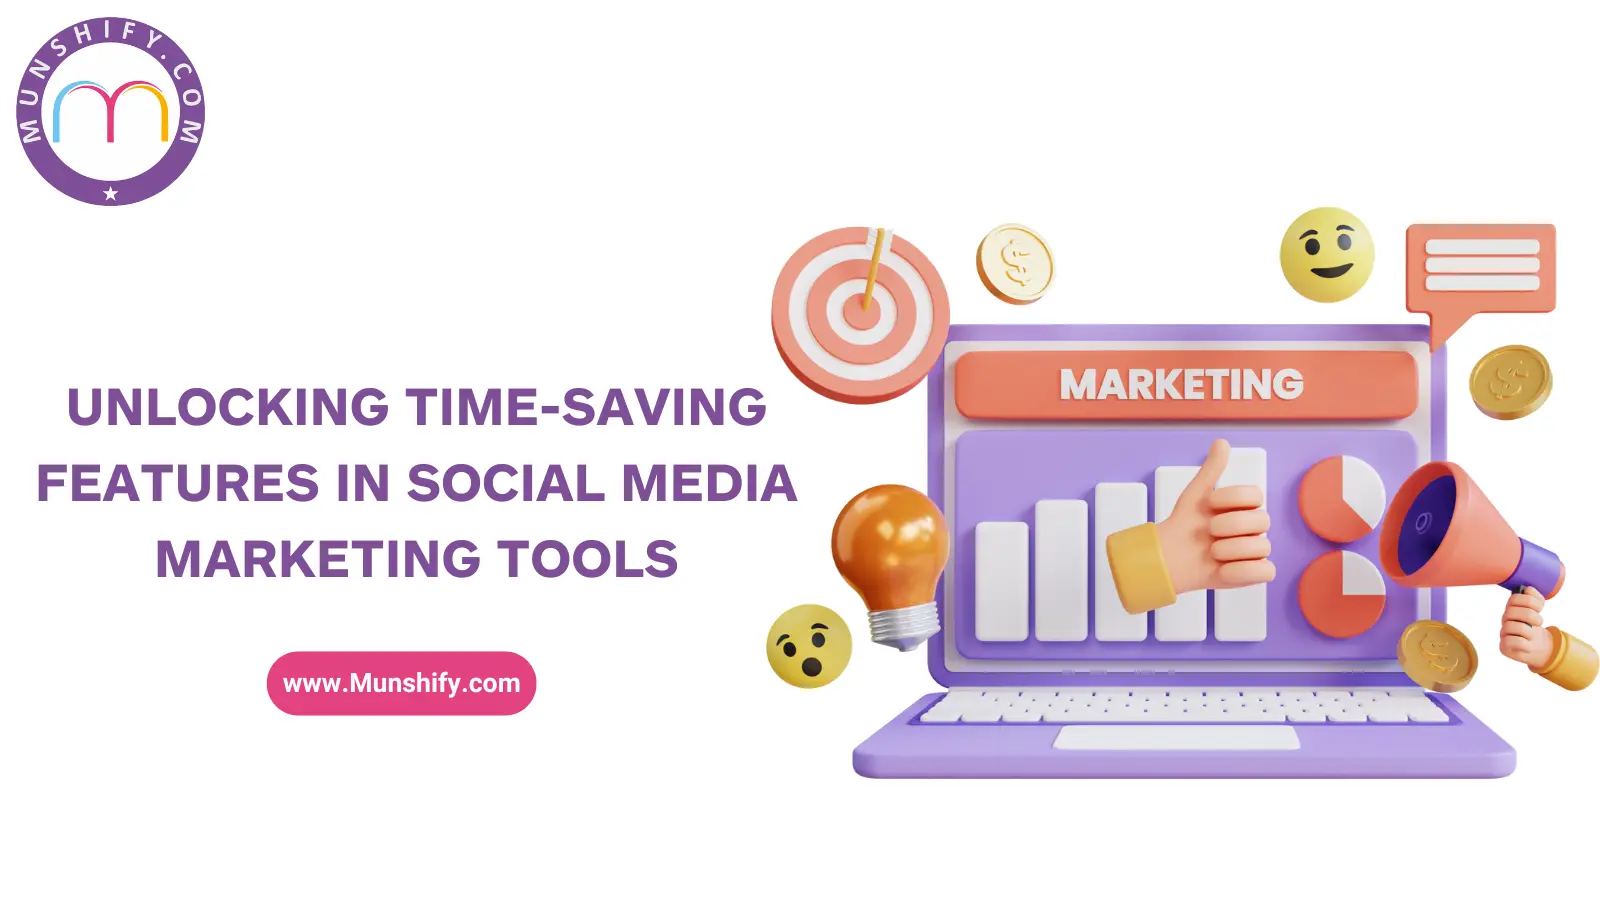 Unlocking Time-Saving Features in Social Media Marketing Tools